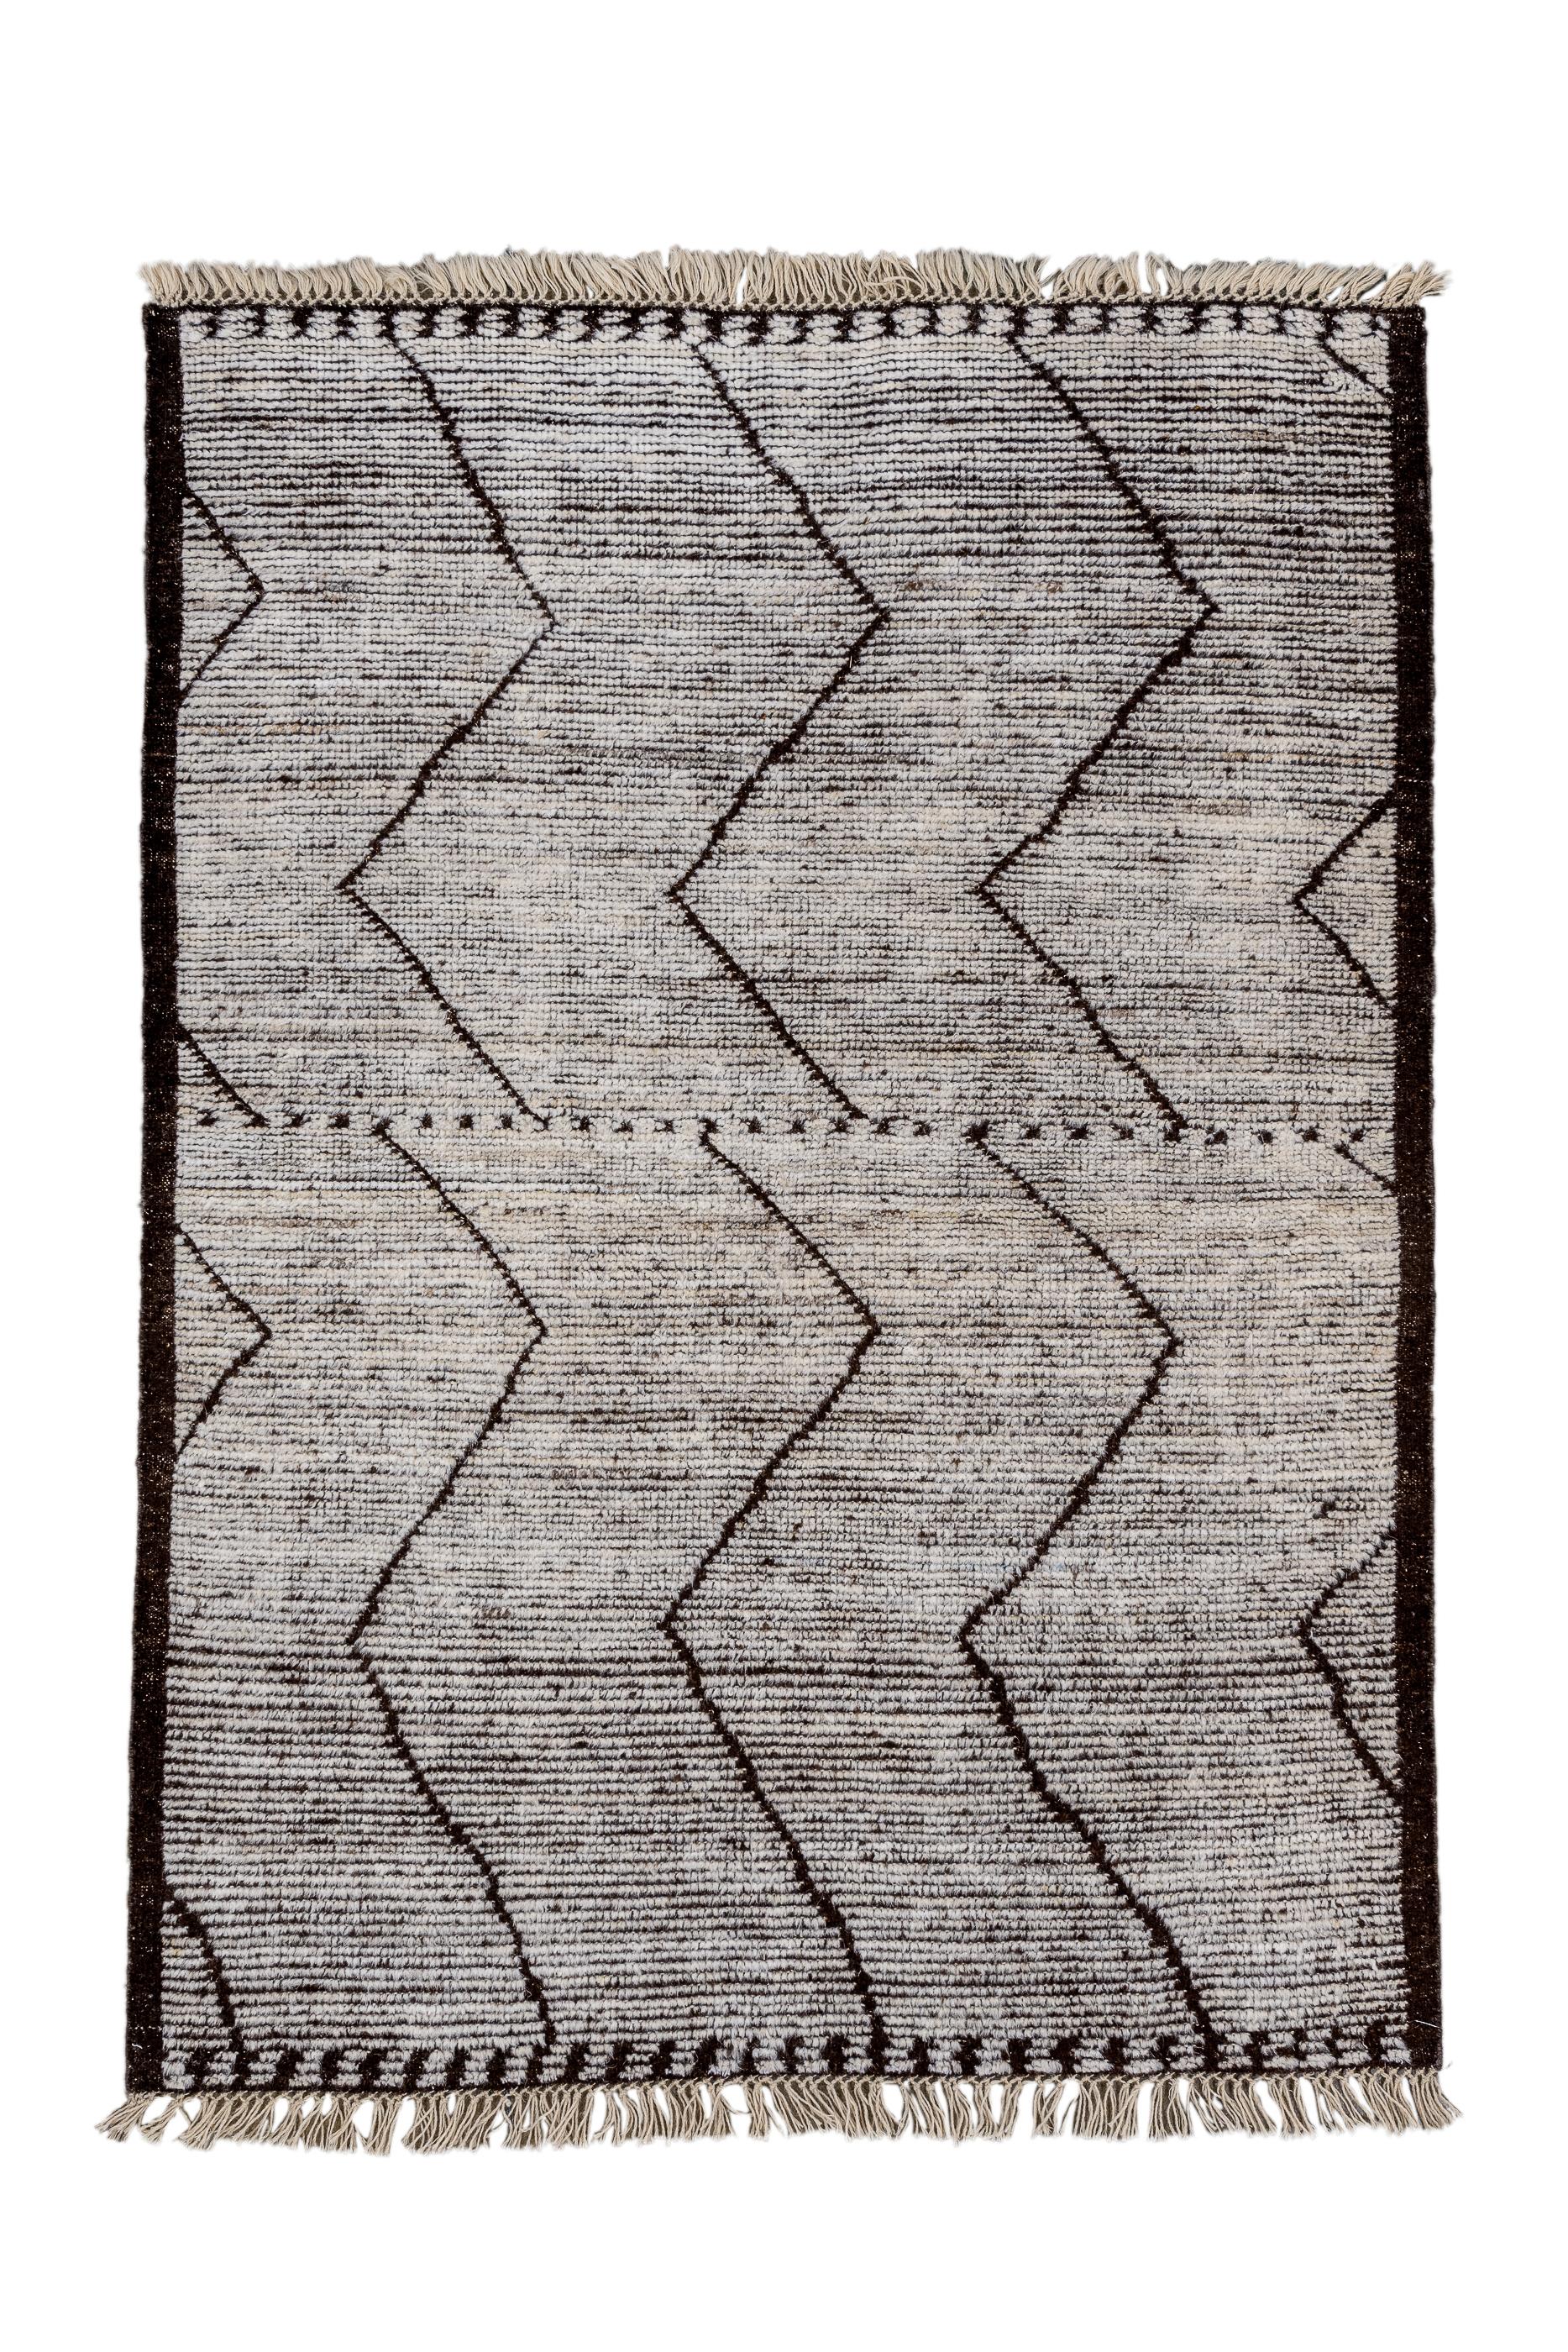 His Turkish village creation shows an abrashed natural beige wool field, decorated by three severed zig-zag verticals, and a few open triangles along the side borders. Dark brown plain string border. Very coarse, with flat, recumbent pile. As new